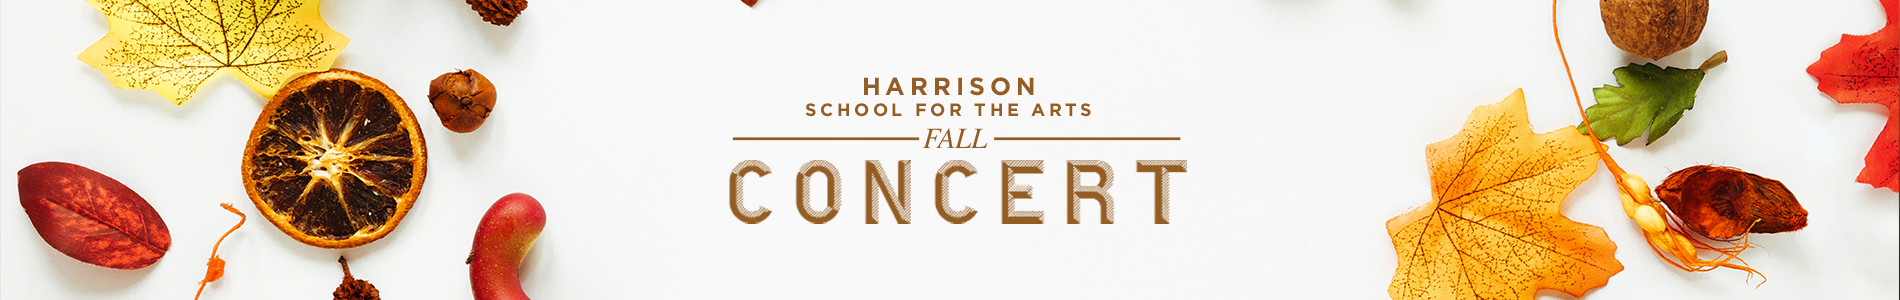 2019 Harrison School for the Arts Fall Concert - STD